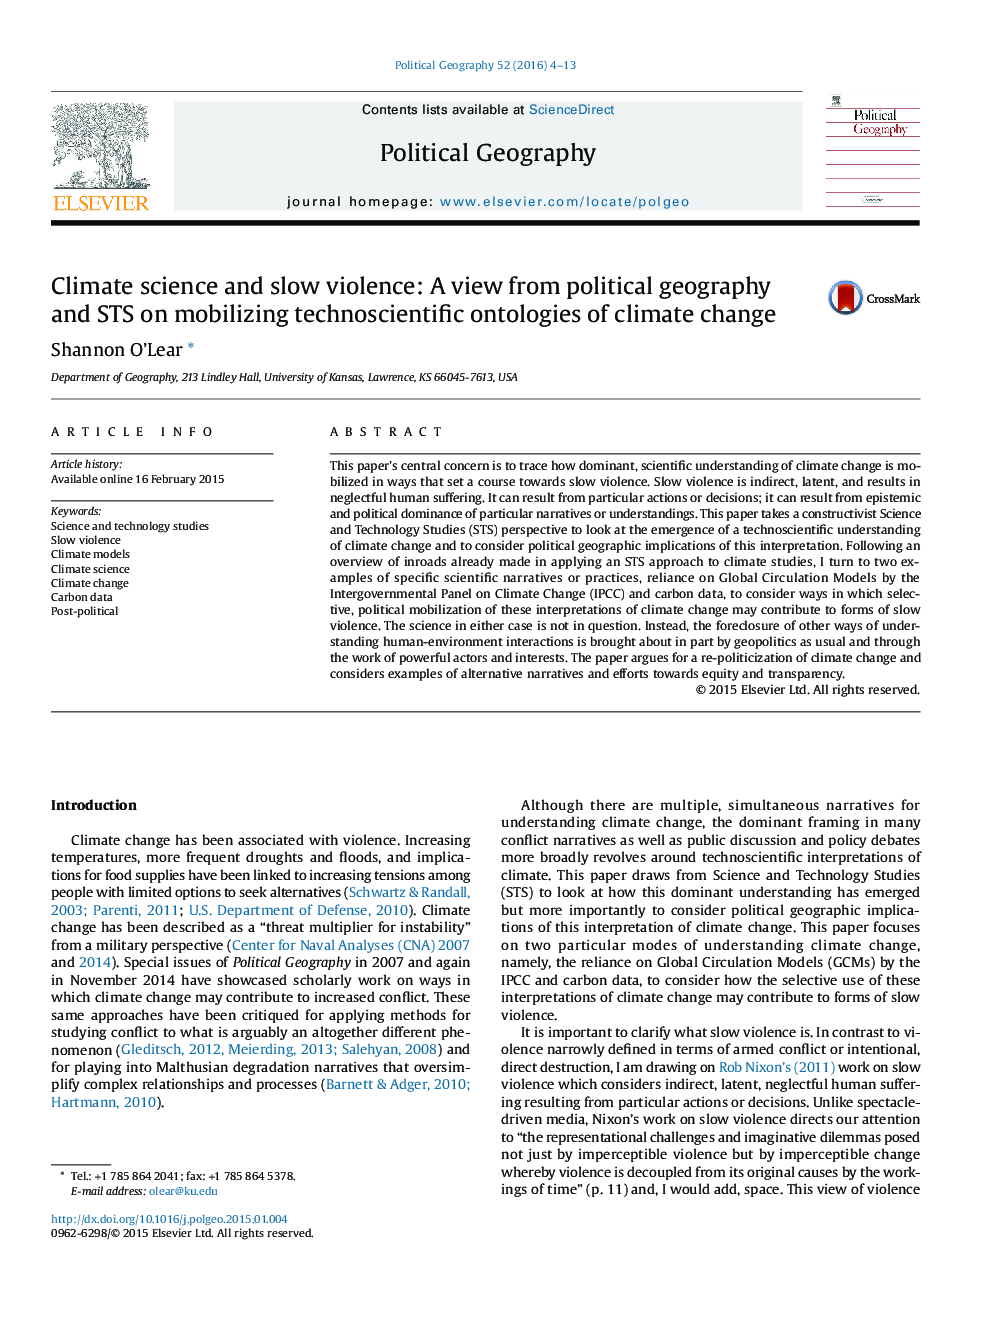 Climate science and slow violence: A view from political geography and STS on mobilizing technoscientific ontologies of climate change